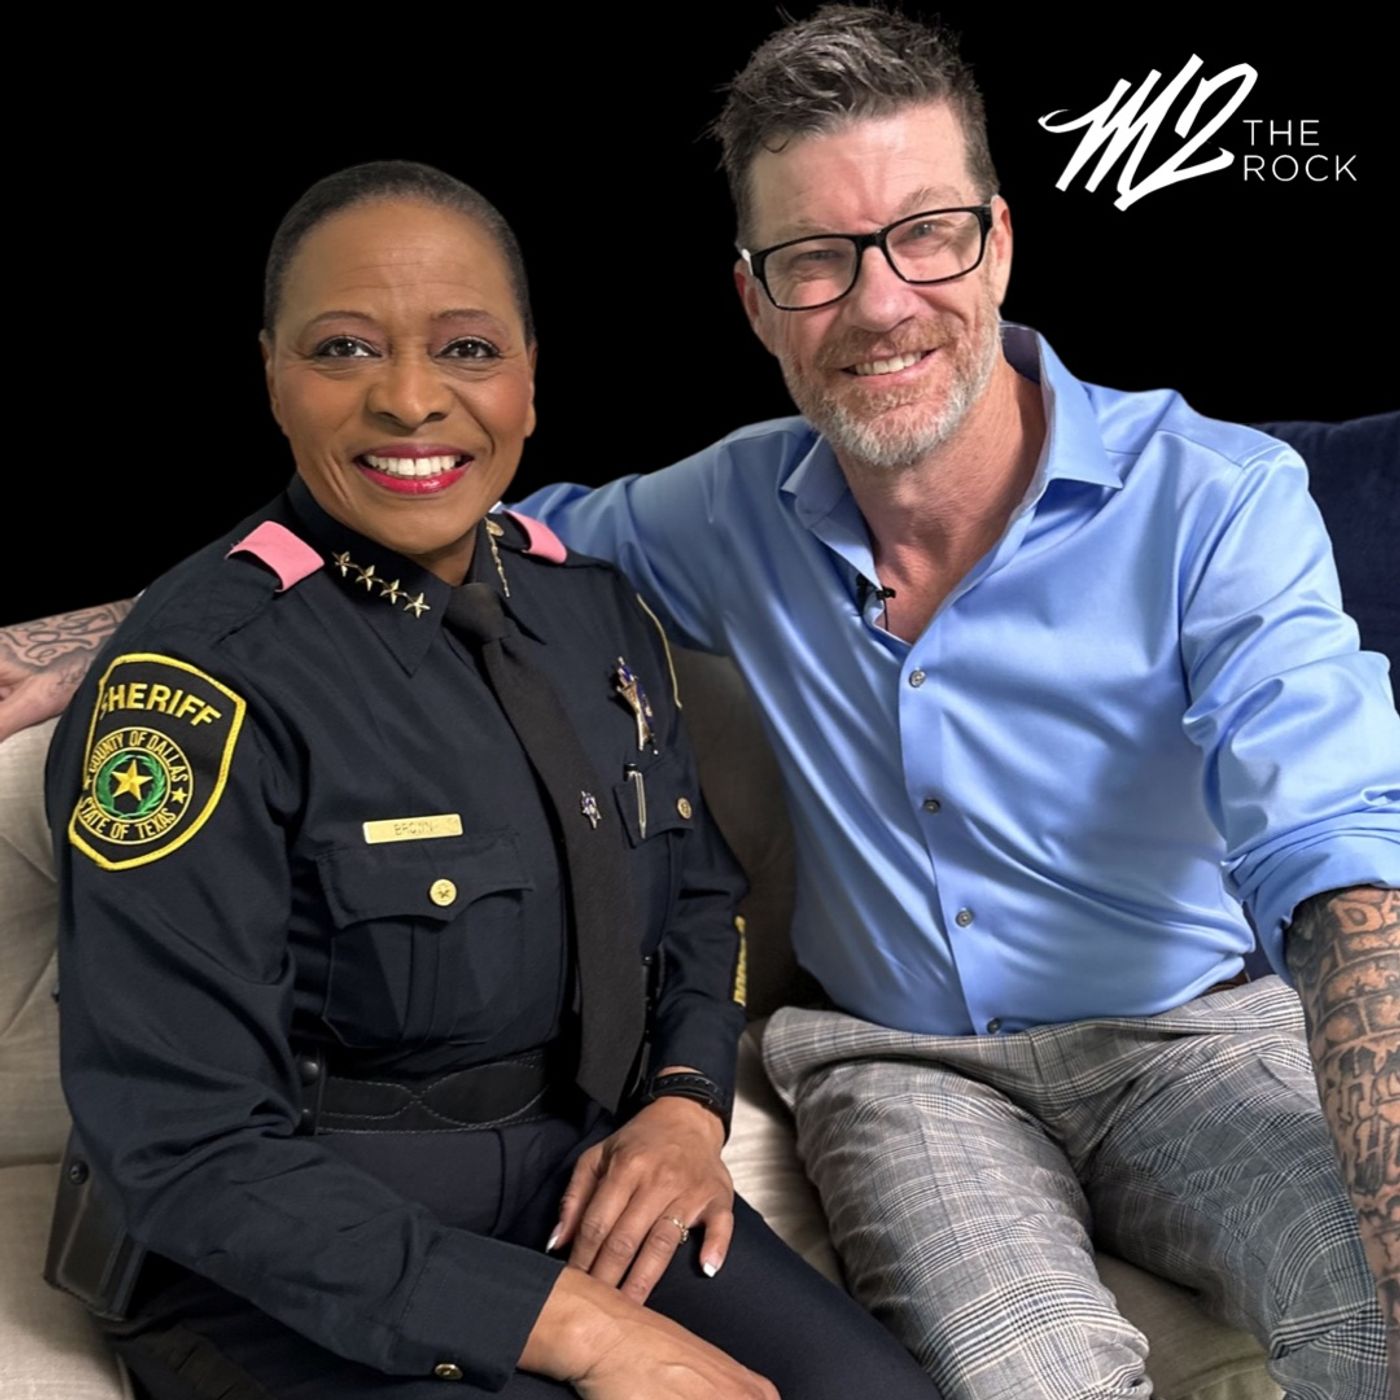 DALLAS COUNTY SHERIFF - MARIAN BROWN sits down with M2 The Rock